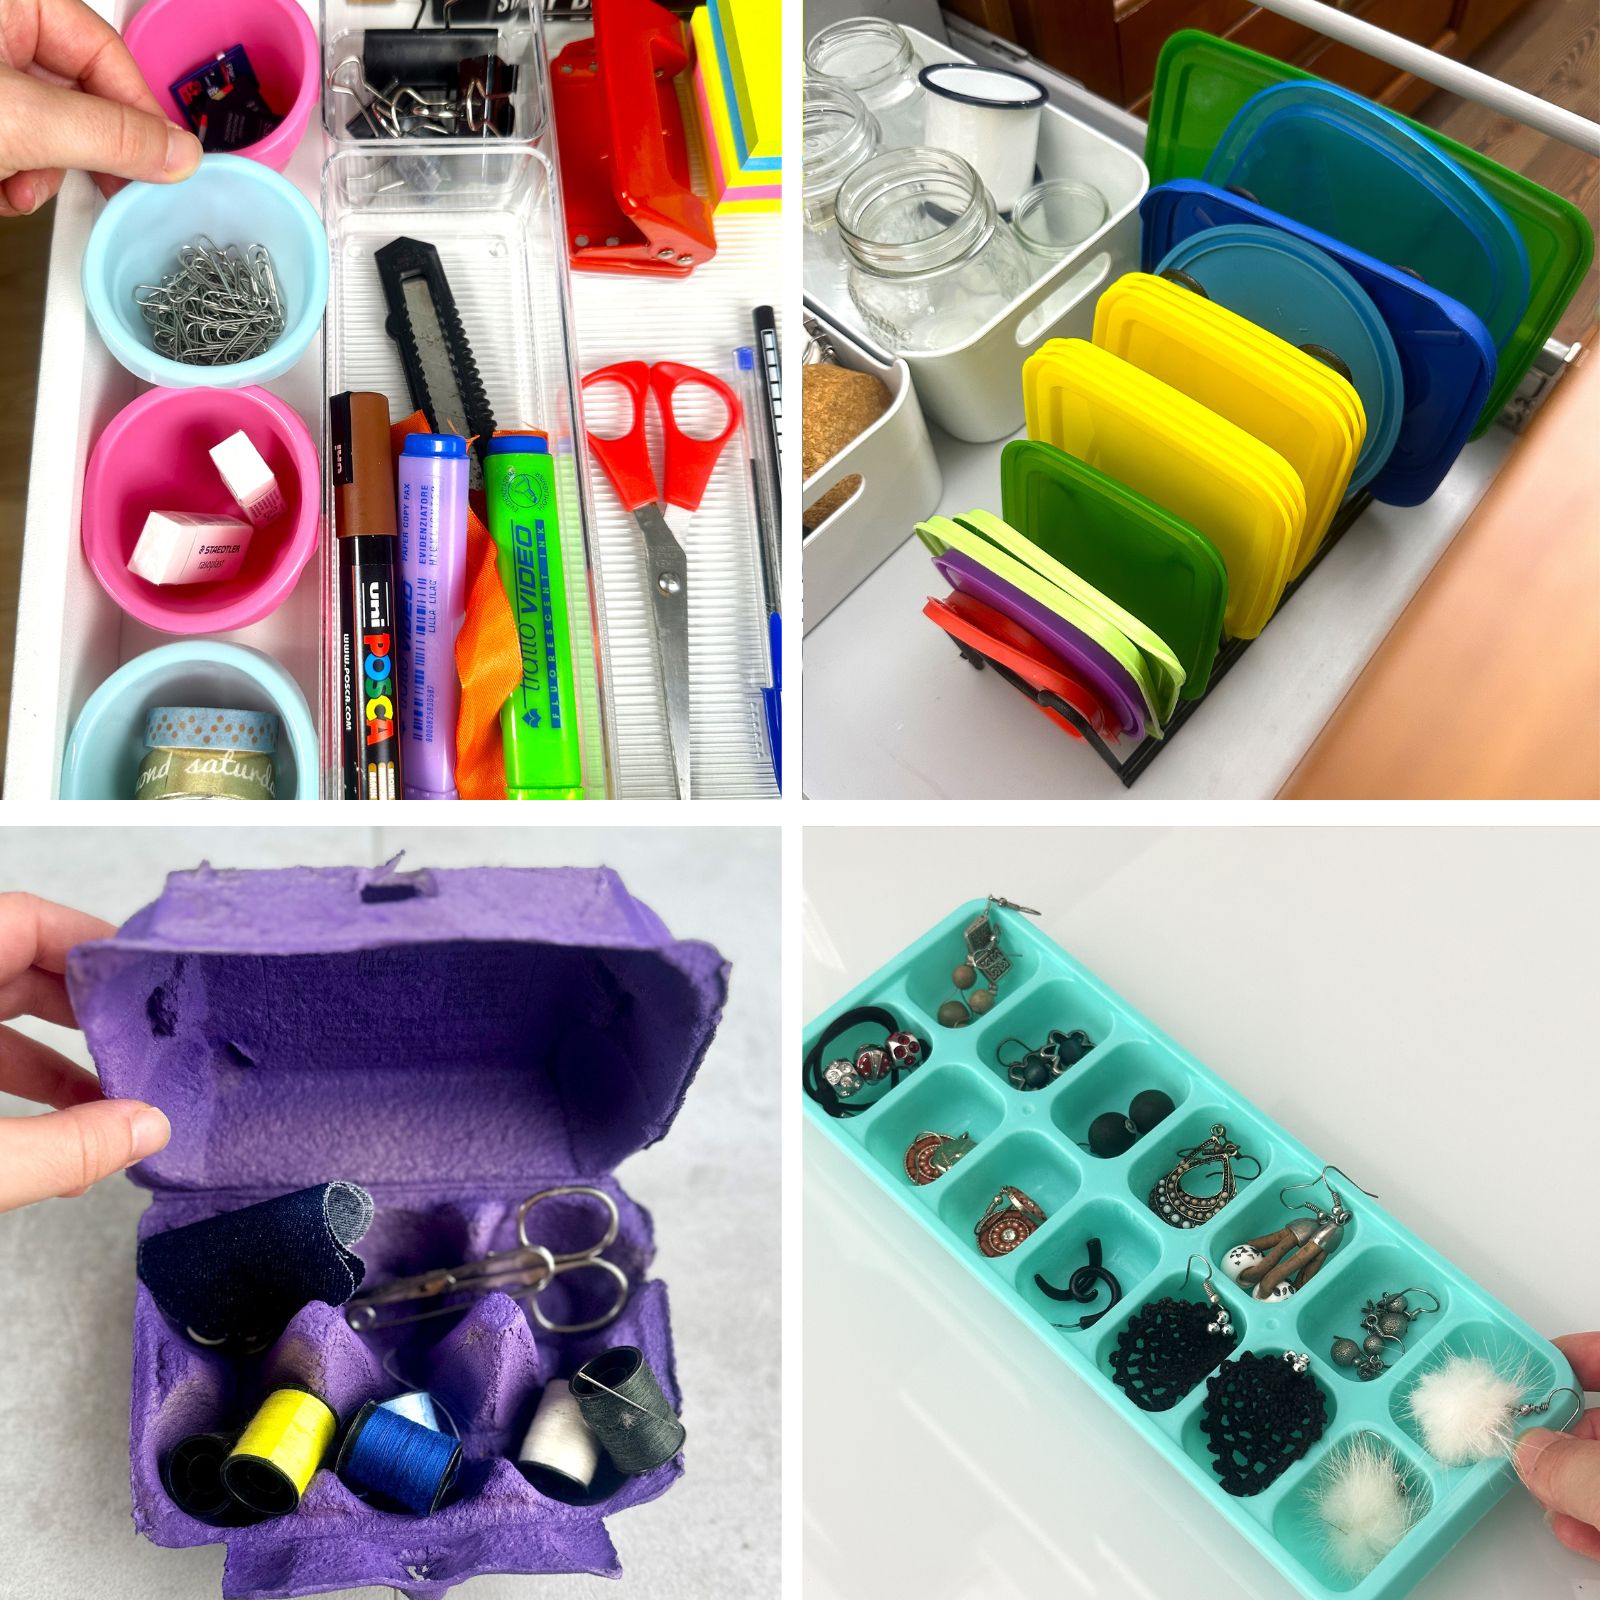 Organization Ideas for Small Items